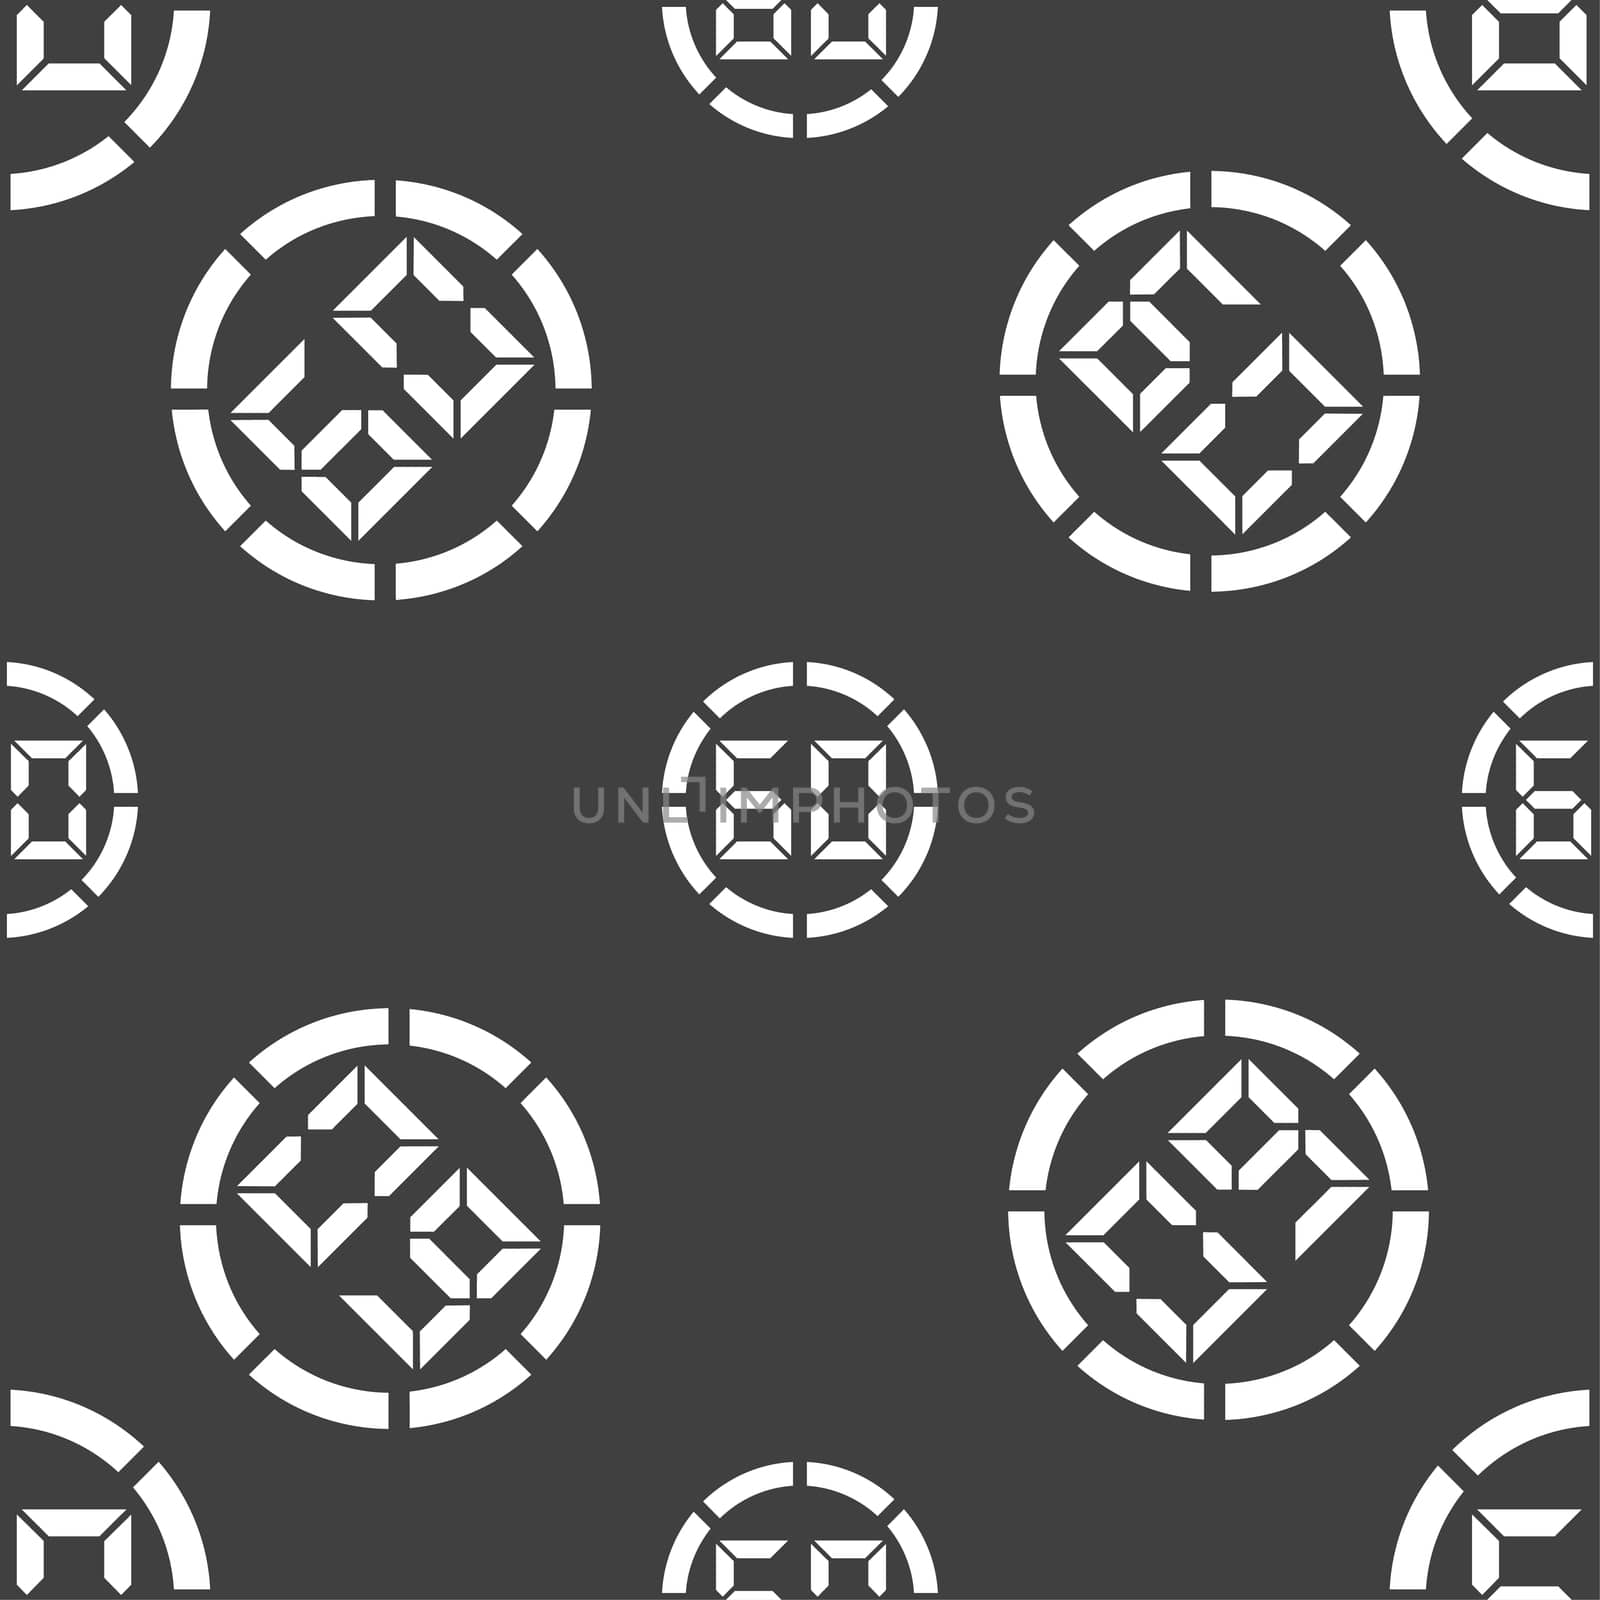 60 second stopwatch icon sign. Seamless pattern on a gray background. illustration